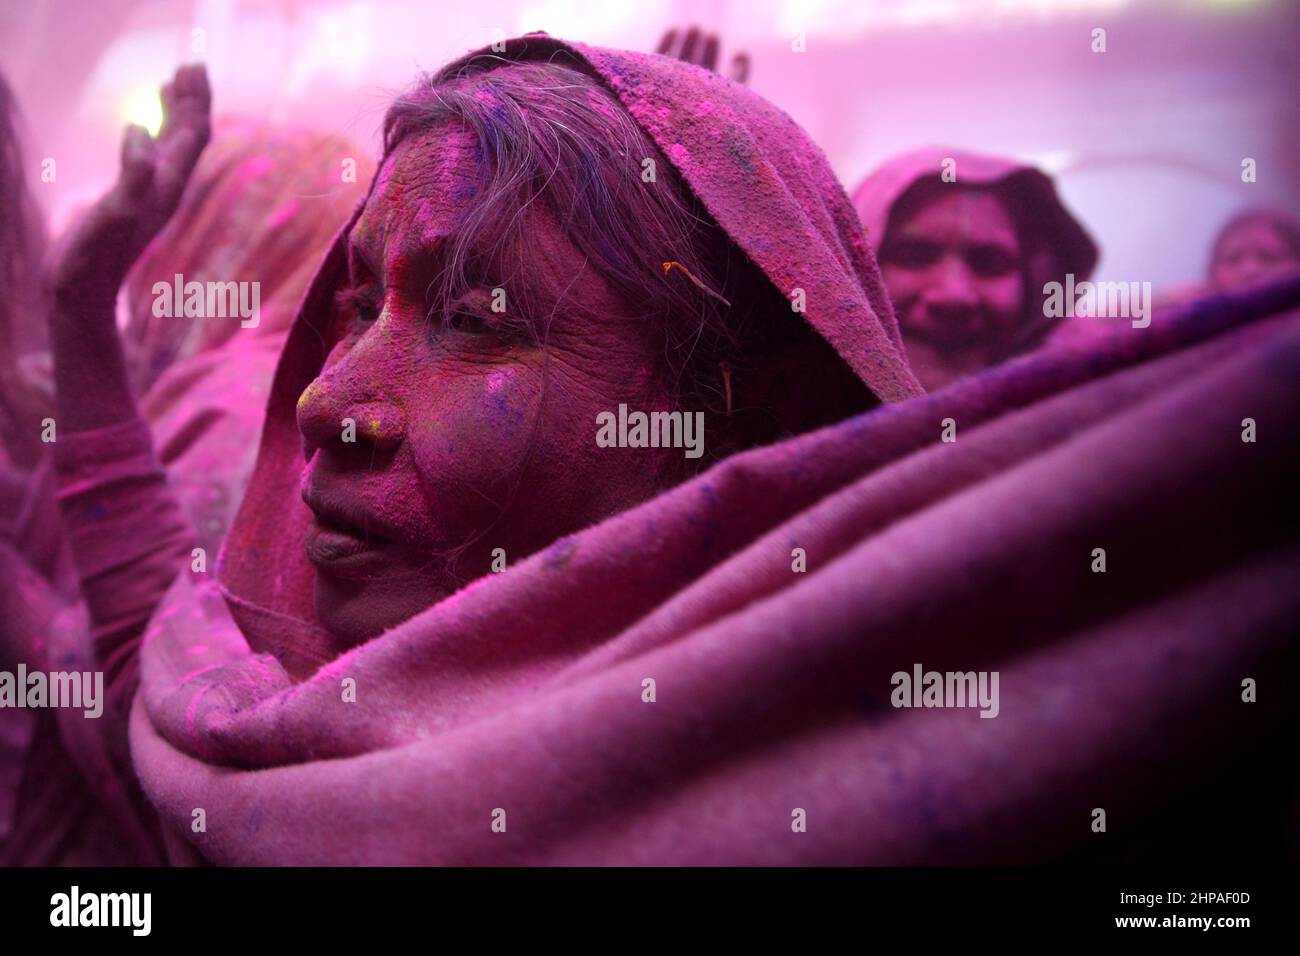 Indian widow women celebrate Holi festival in a old age home for widow women in Vrindavan, India in 2015. Stock Photo